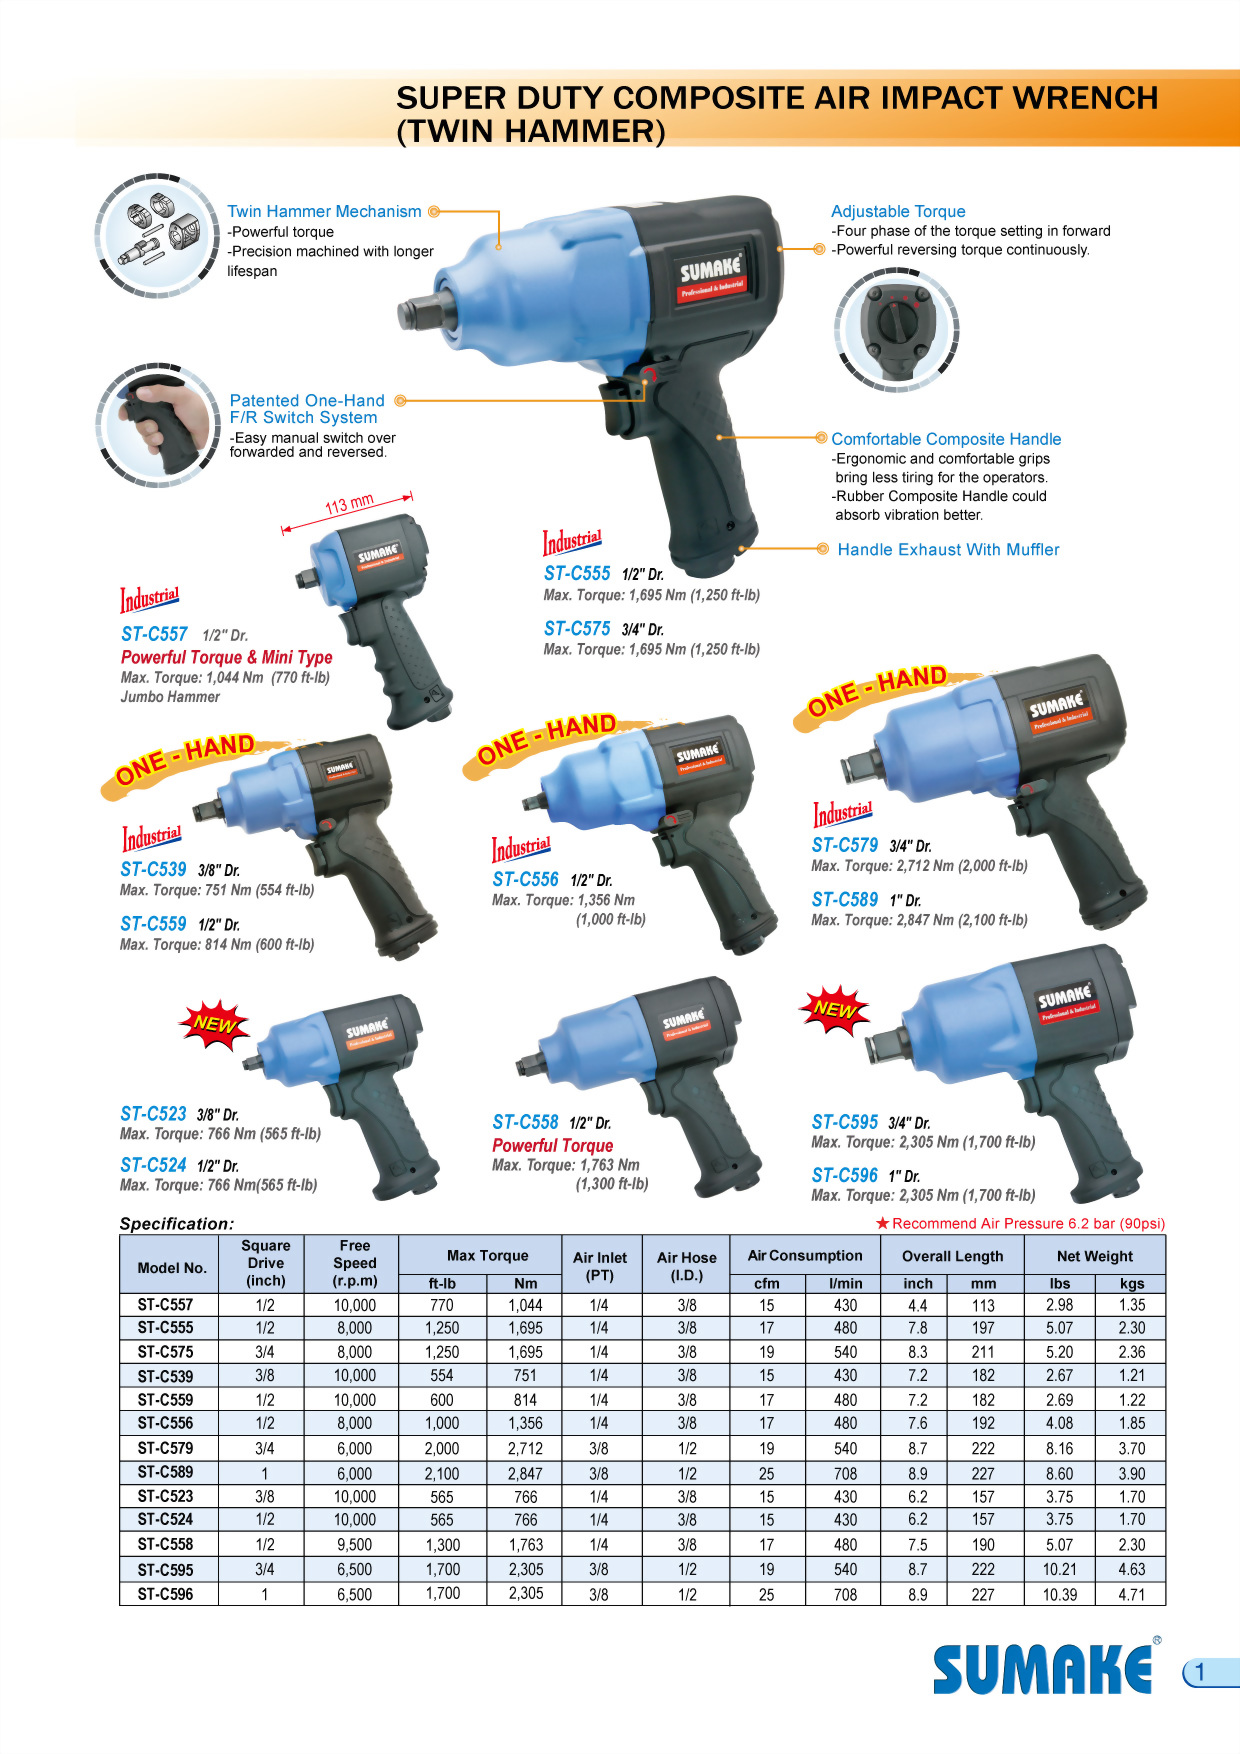 Industrial Composite Air Impact Wrench-1695 Nm, 8,000 rpm